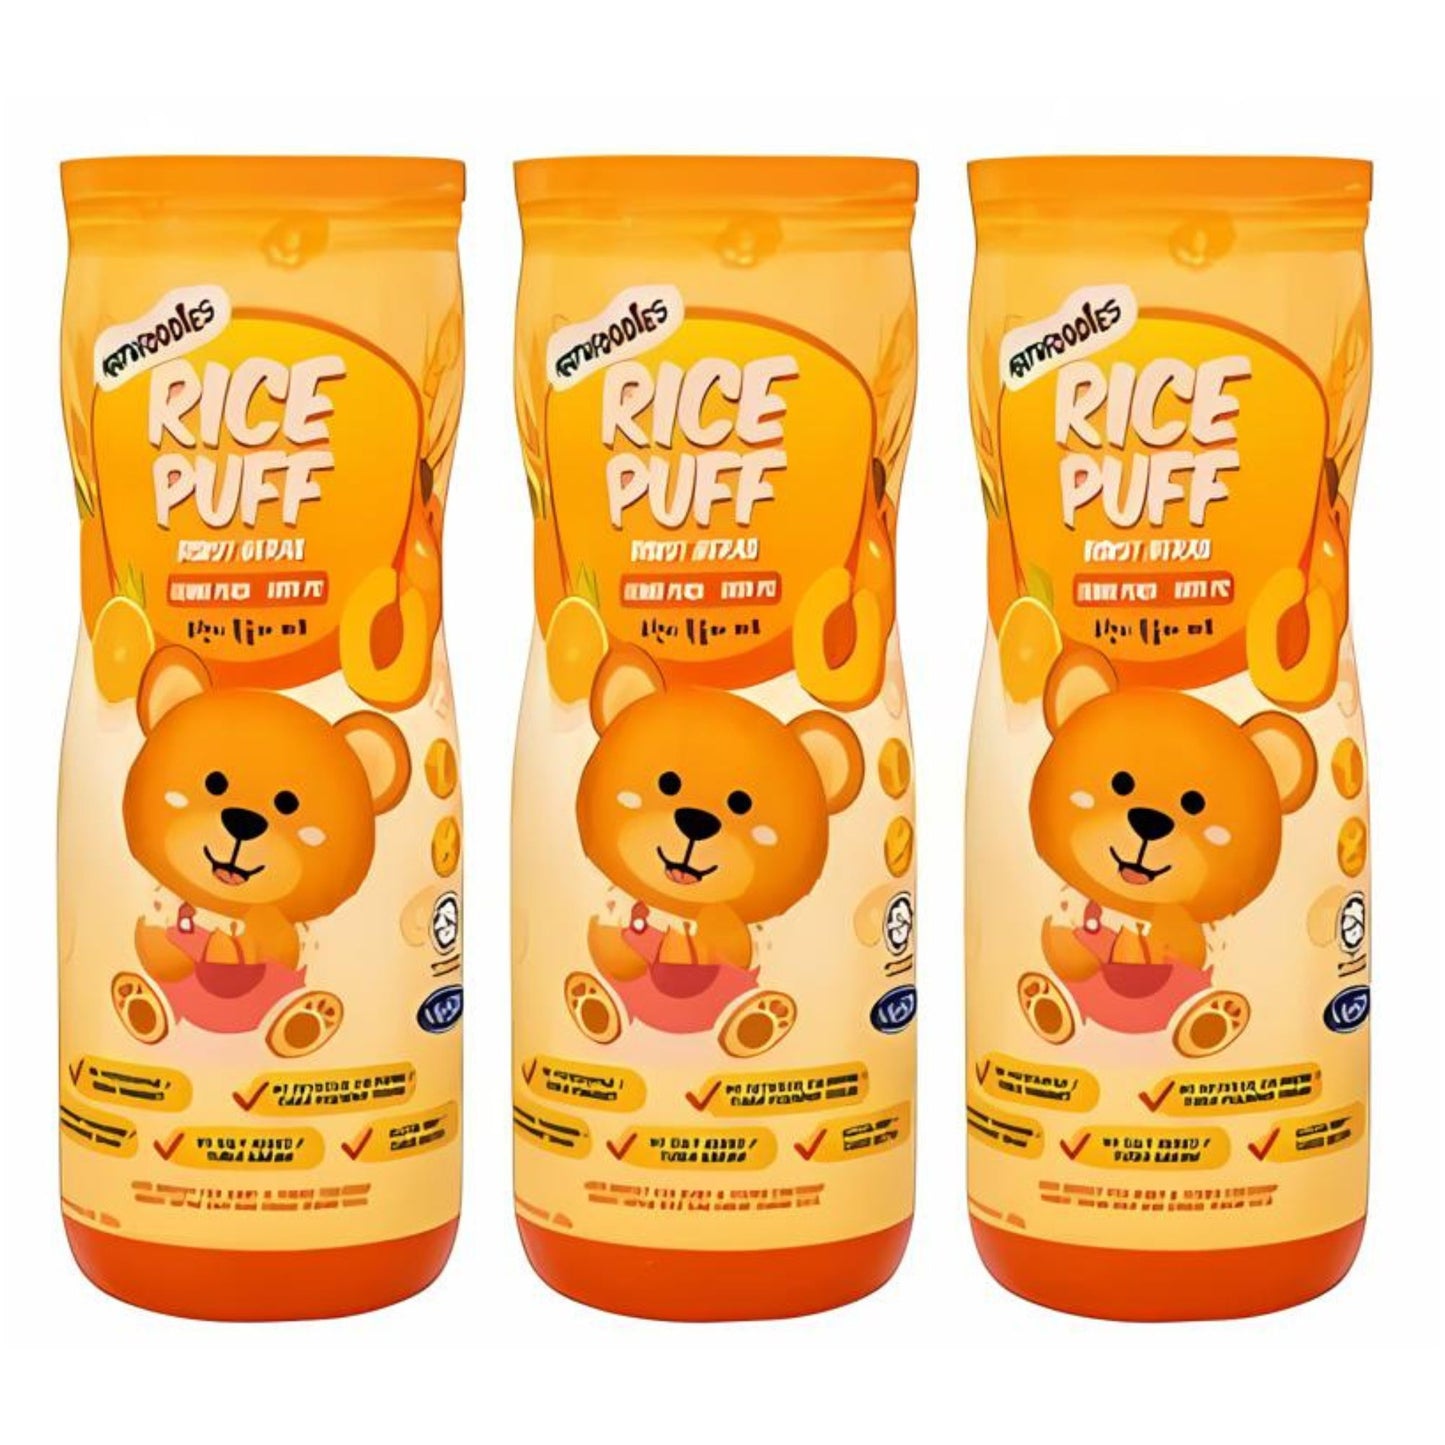 BUNDLE OF 3 Natufoodies Rice Puff Snack Suitable for Baby 8 Months Up